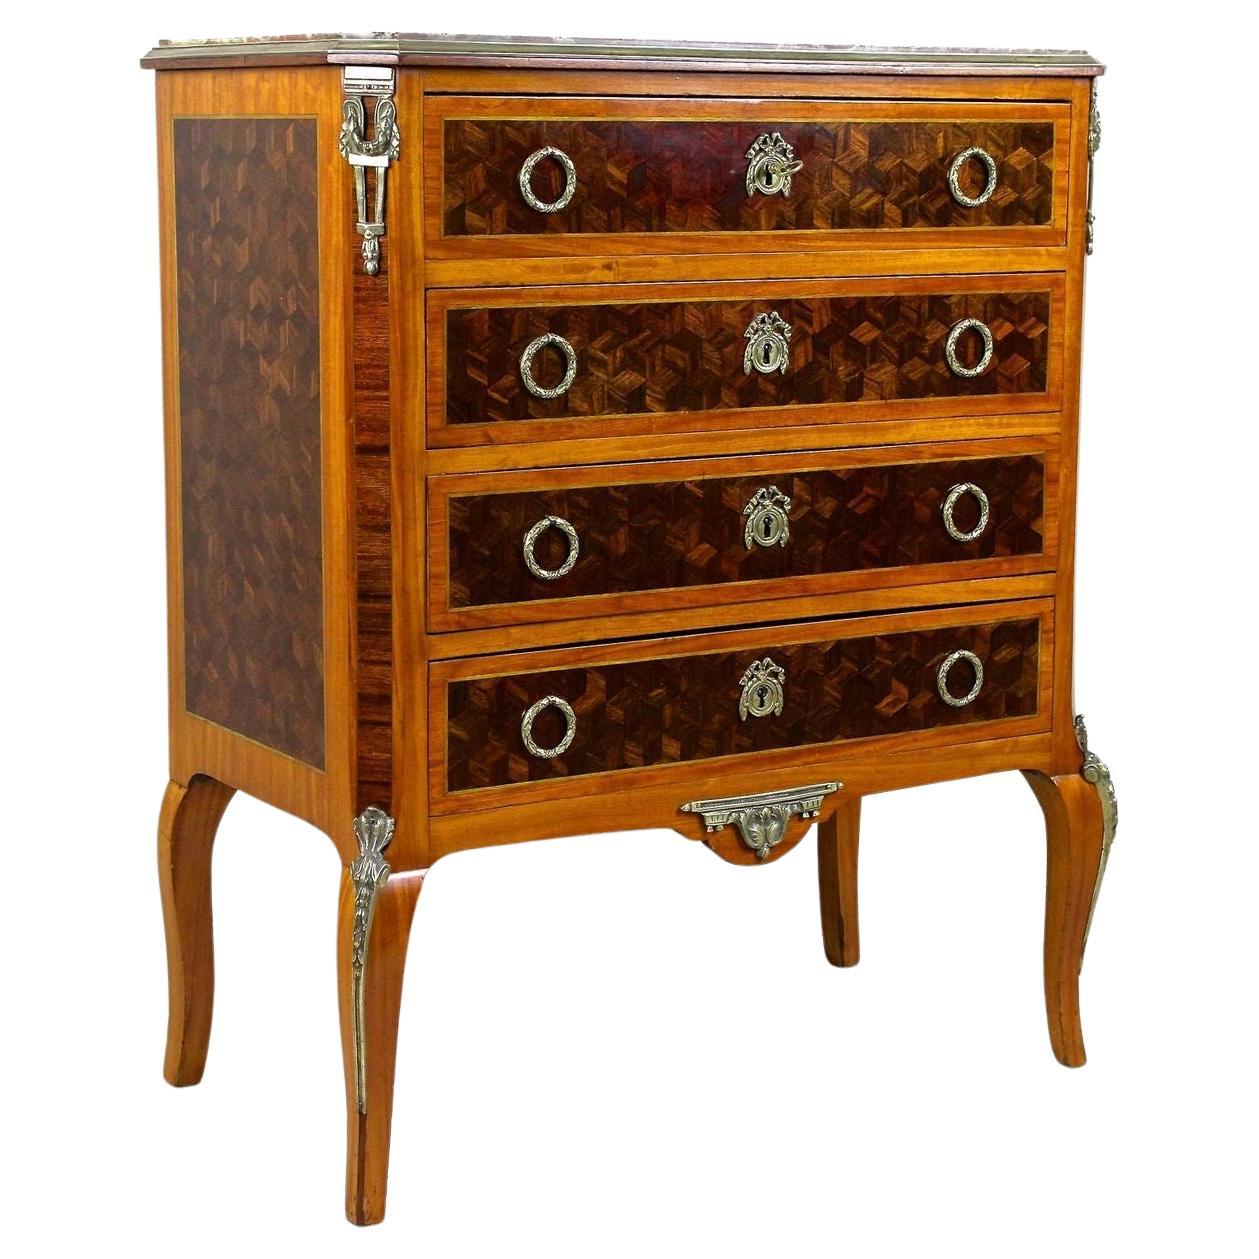 19th Century French Transitional Marquetry Chest of Drawers, France, circa 1870